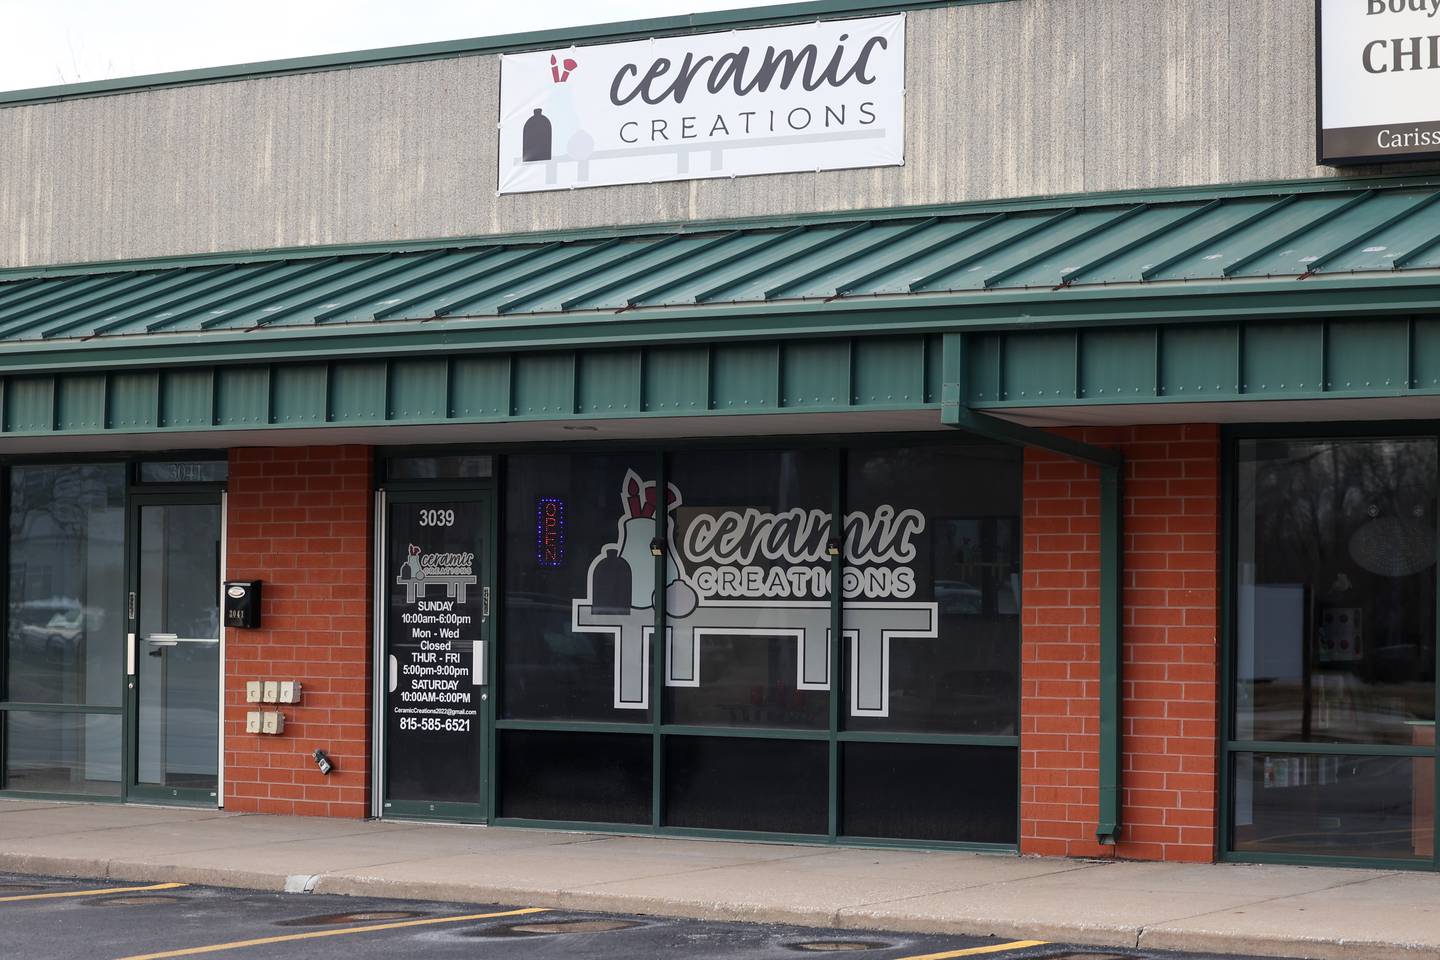 Ceramic Creations in Joliet allows customers to get creative by painting a wide selection of ceramics.